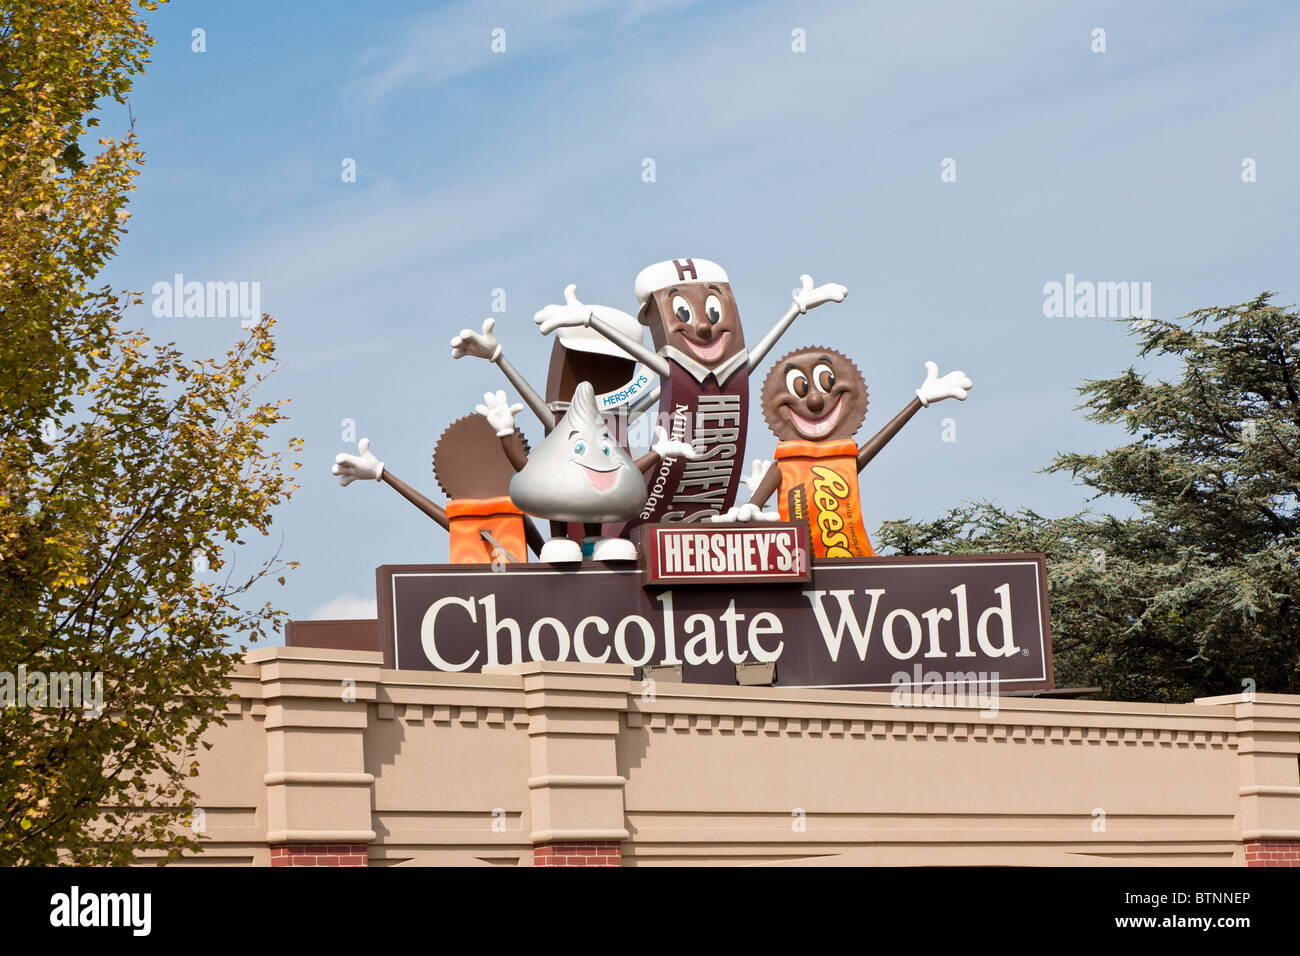 Hershey, PA - Sept 2009 - Hershey's Factory Works and Chocolate World tourist attraction in Hershey Pennsylvania Stock Photo